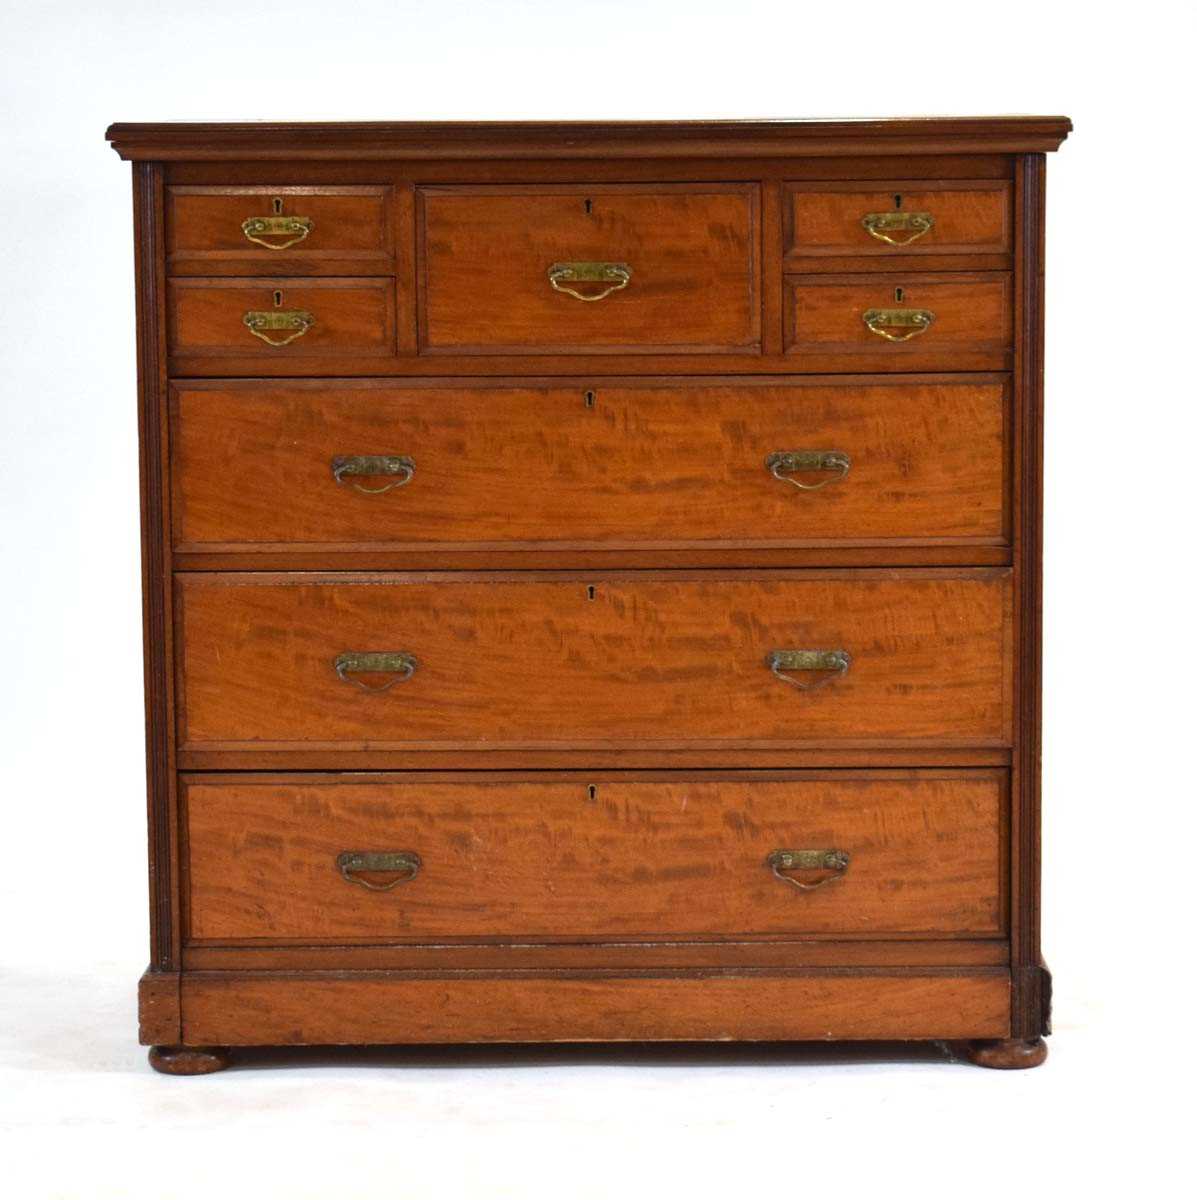 A late 19th century mahogany chest of eight drawers by James Shoolbred & Co., on a plinth base, - Image 2 of 3